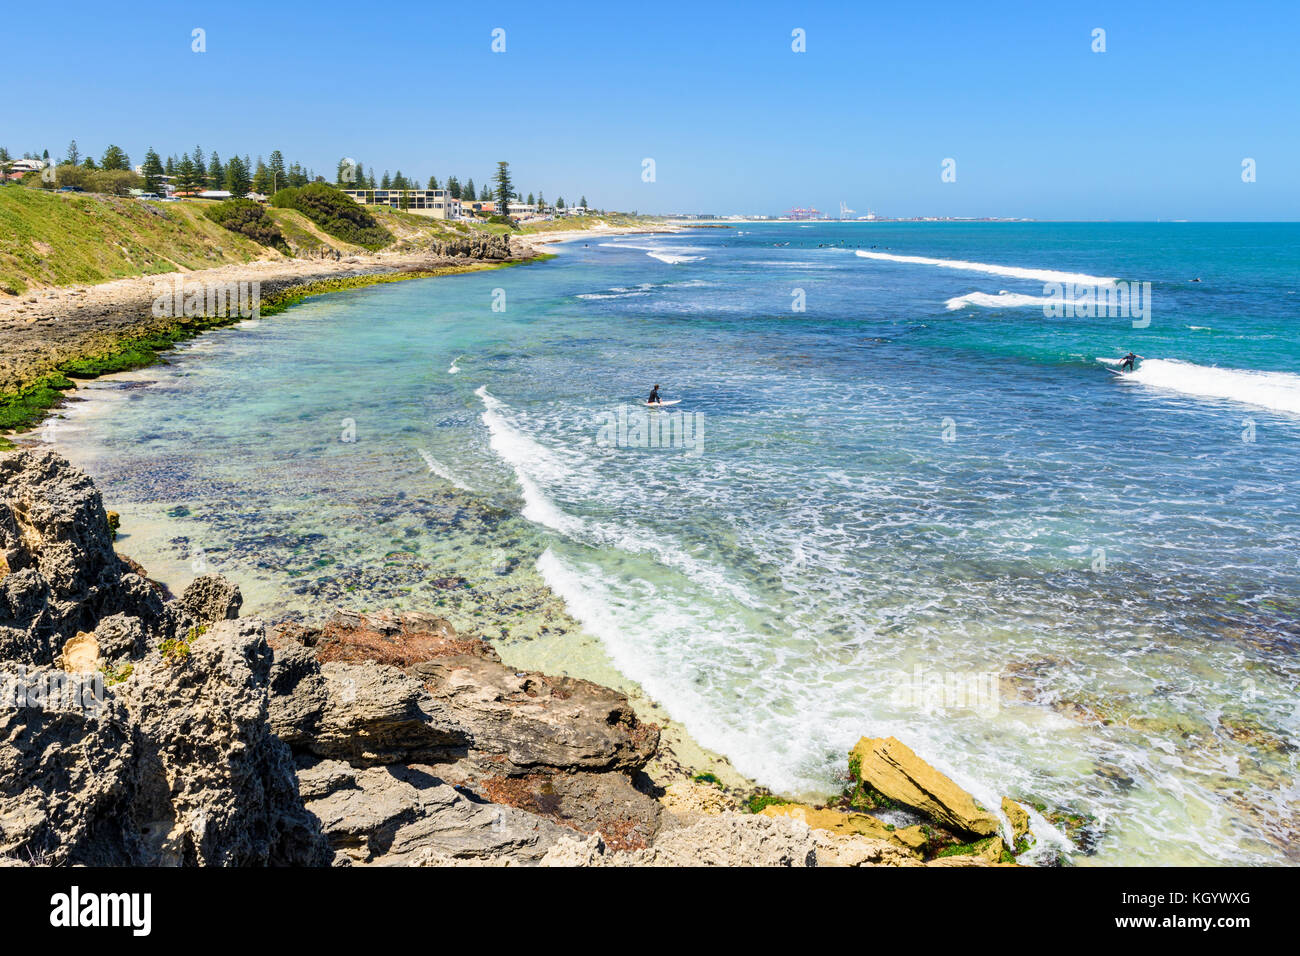 The popular rocky reef lined surfing beach of South Cottesloe, Cottesloe, Western Australia Stock Photo